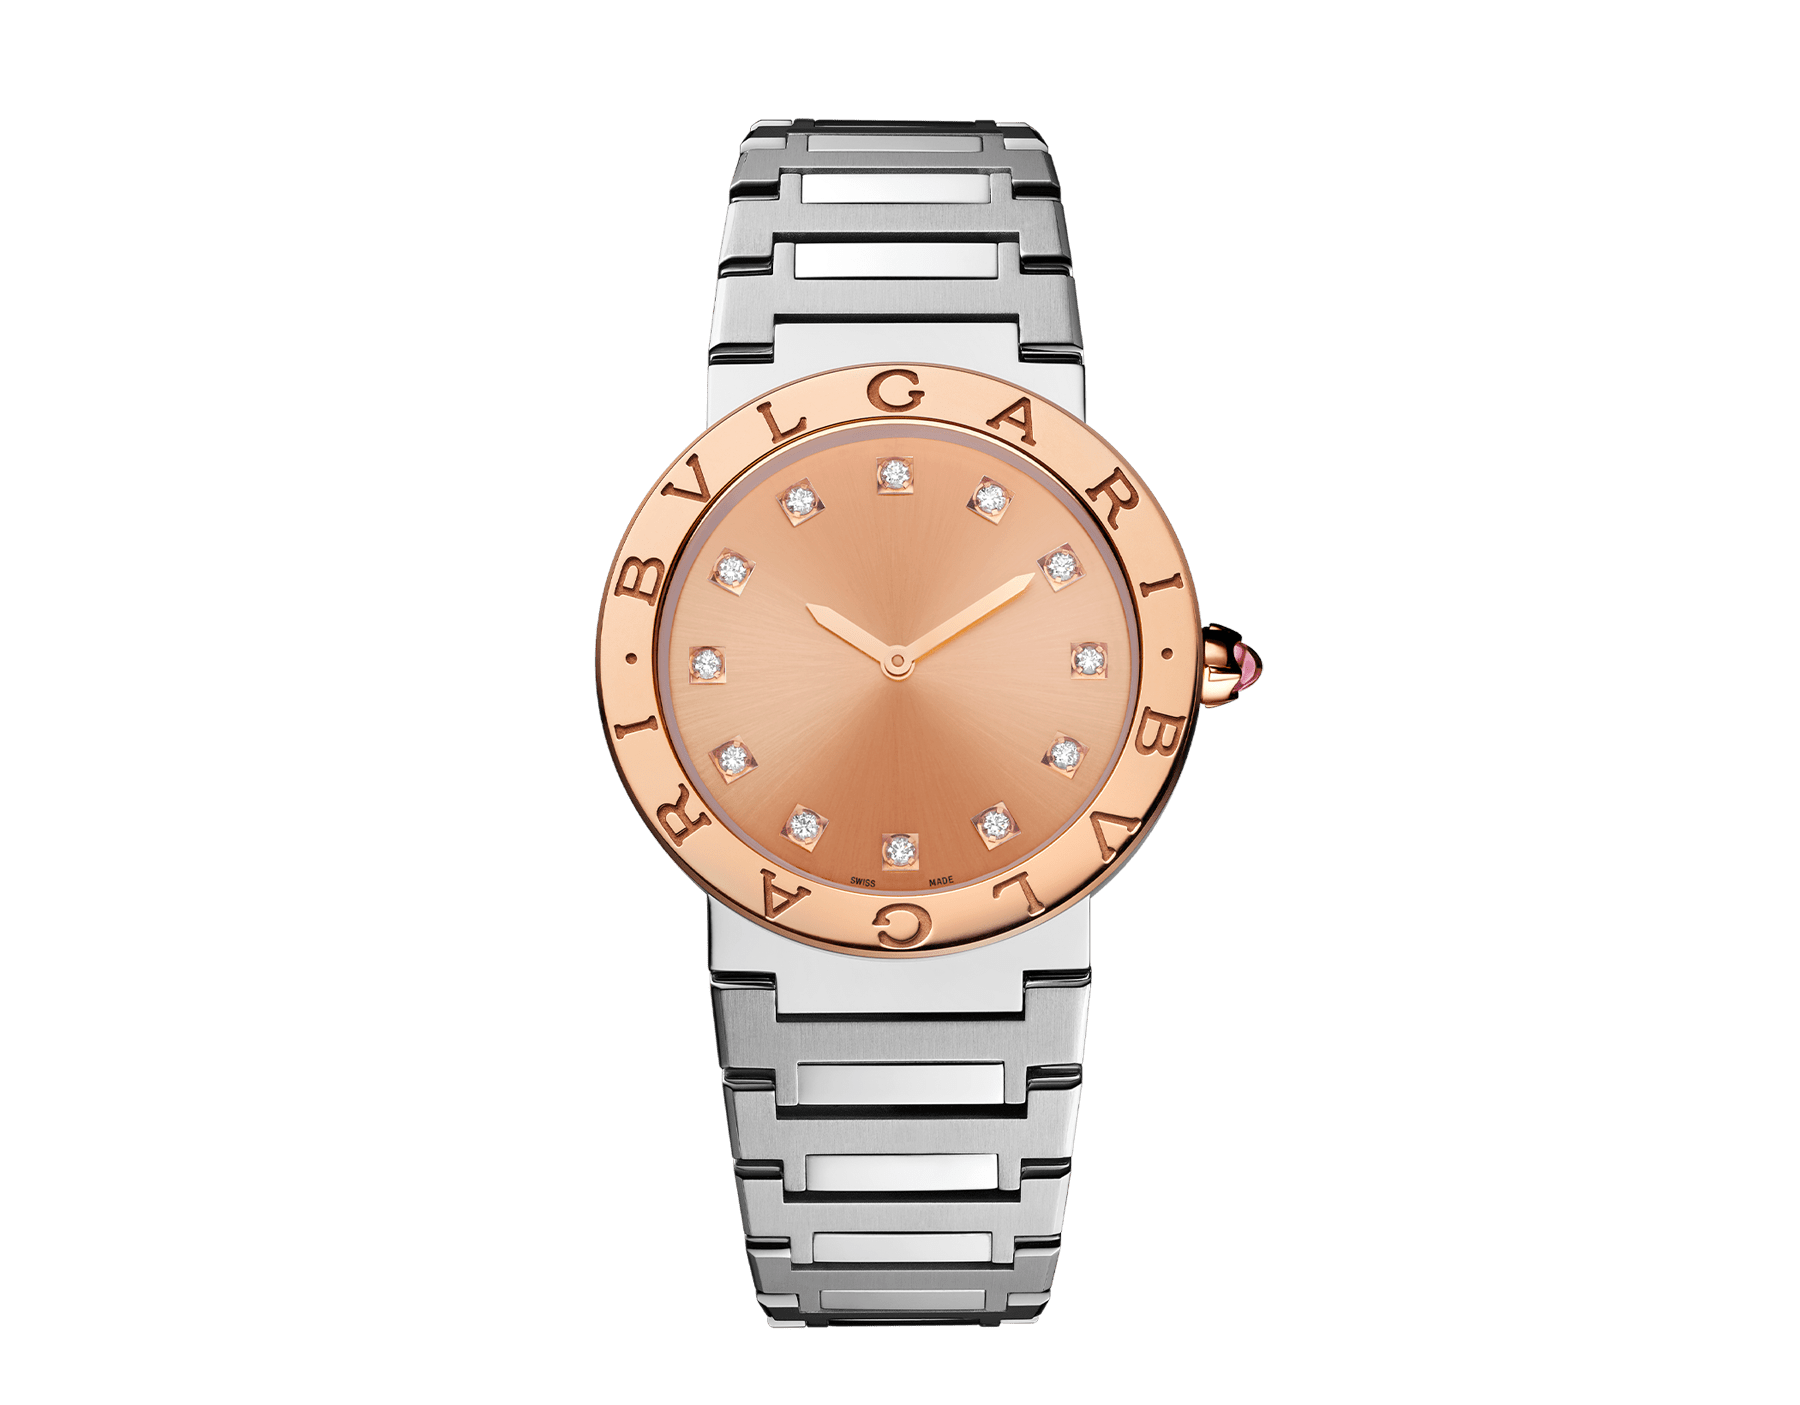 BULGARI BULGARI watch with satin-polished stainless steel case and bracelet, 18 kt rose gold bezel engraved with the double BULGARI logo, orange lacquered sunray dial and 12 diamond indexes. Water-resistant up to 30 meters. Resort Limited Edition of 100 pieces. 103682 image 1